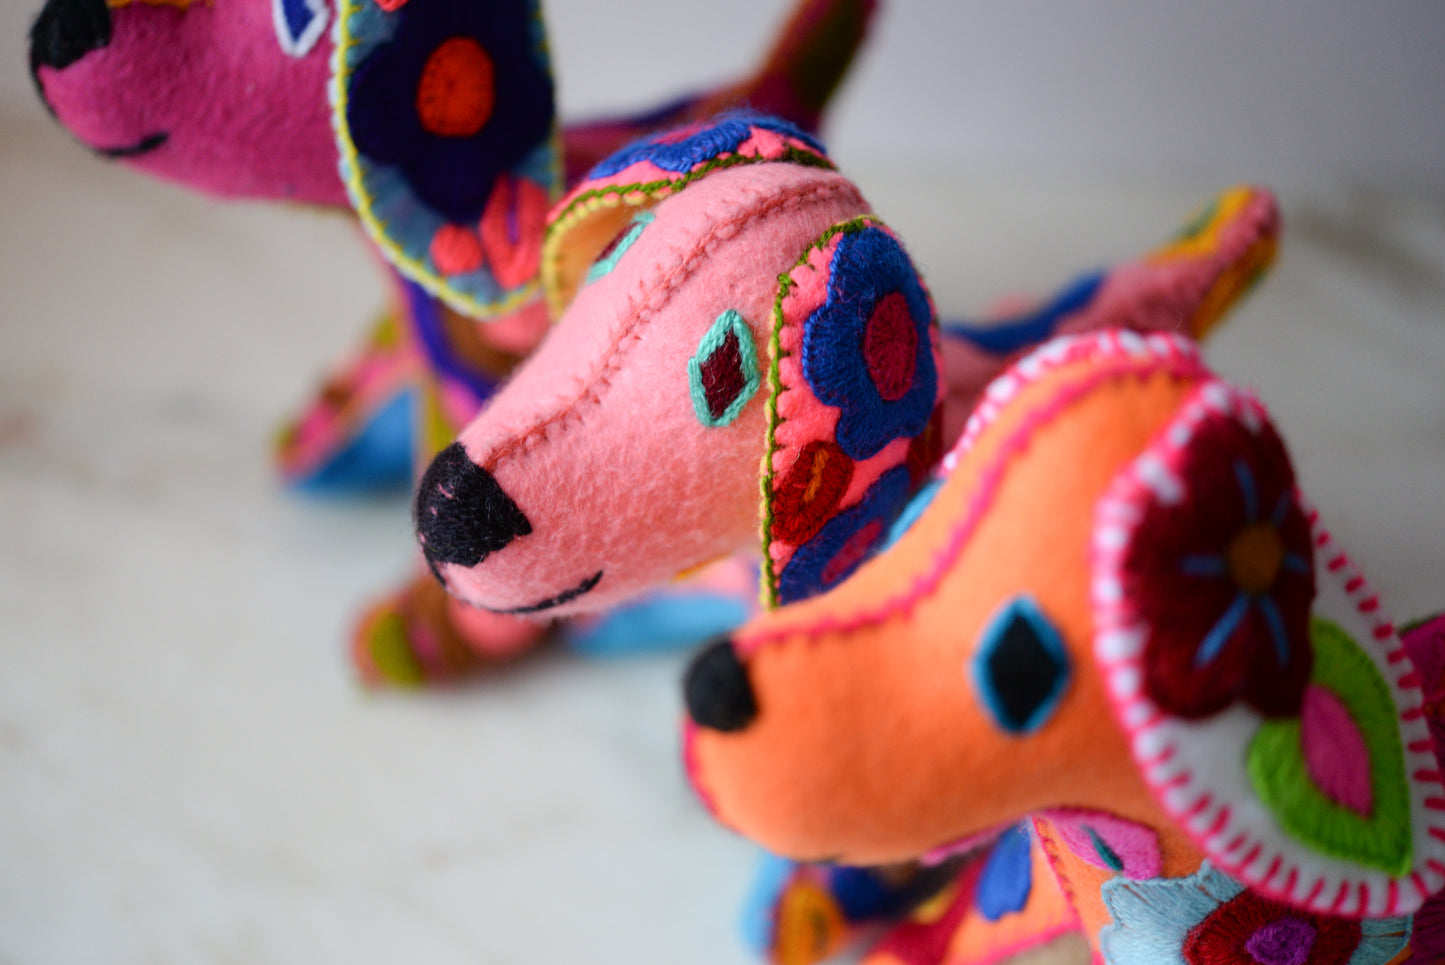 Handcrafted Felt Embroidered Dog from Mexico - The Little Pueblo